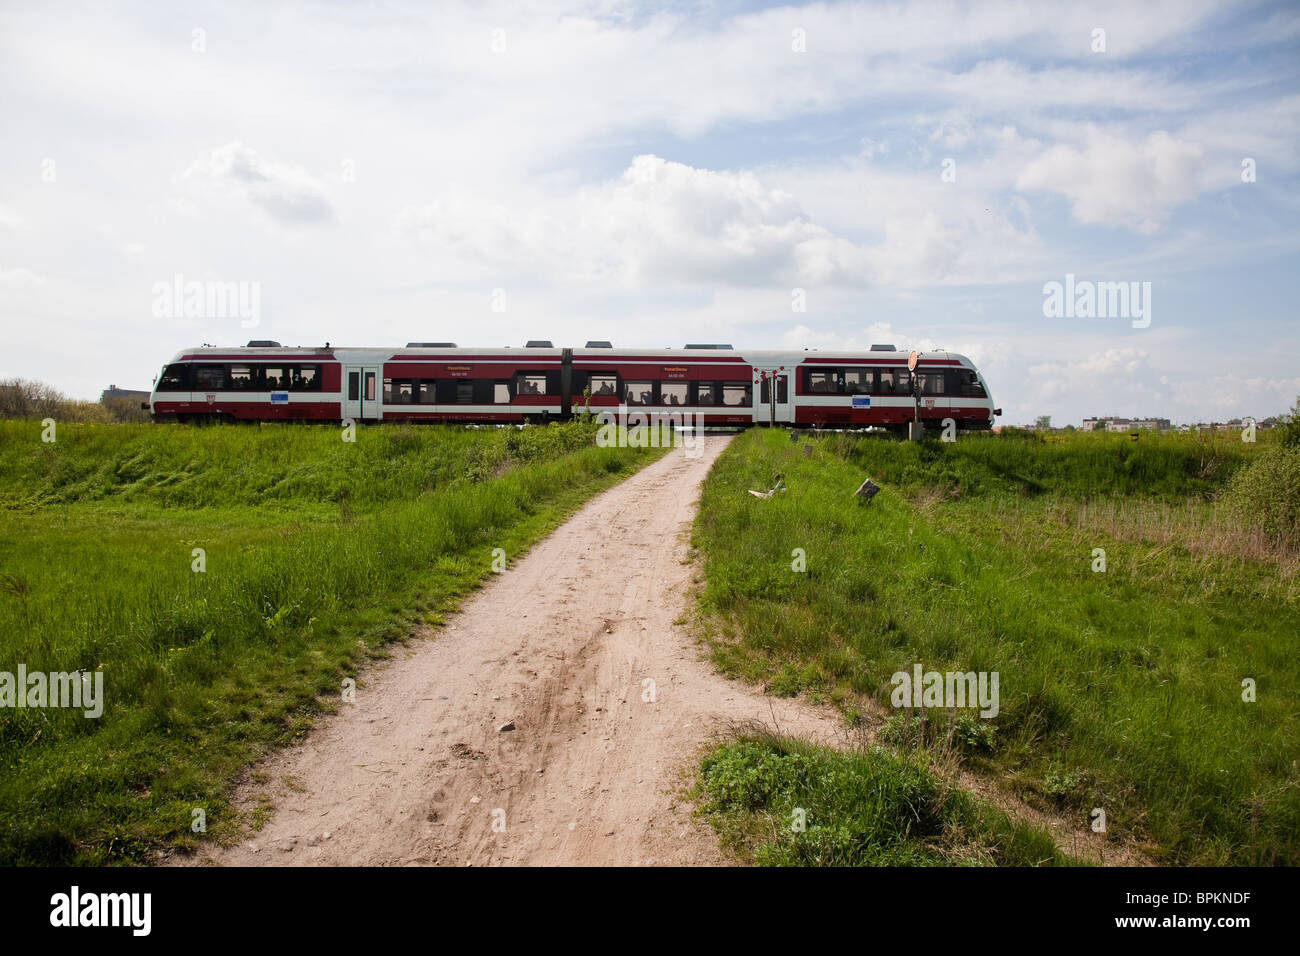 A train is a connected series of vehicles for rail transport that move along a track (permanent way) to transport Stock Photo